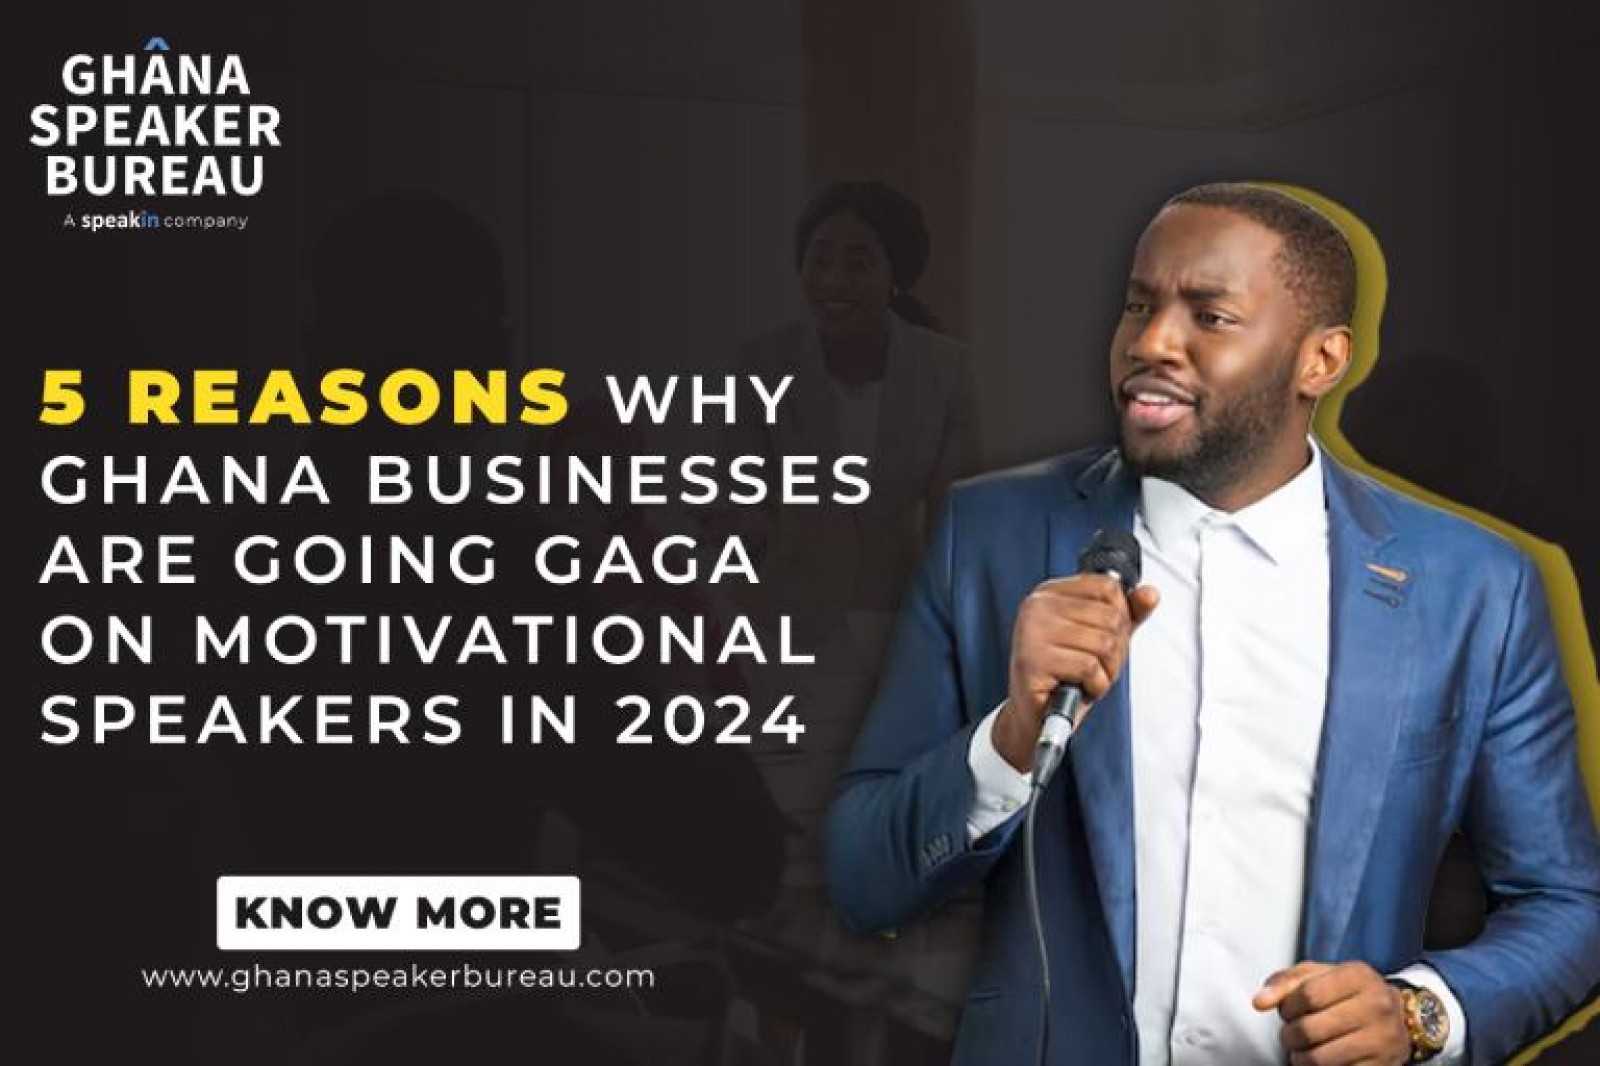 5 Reason why Ghana businesses are going gaga on motivational speakers in 2024